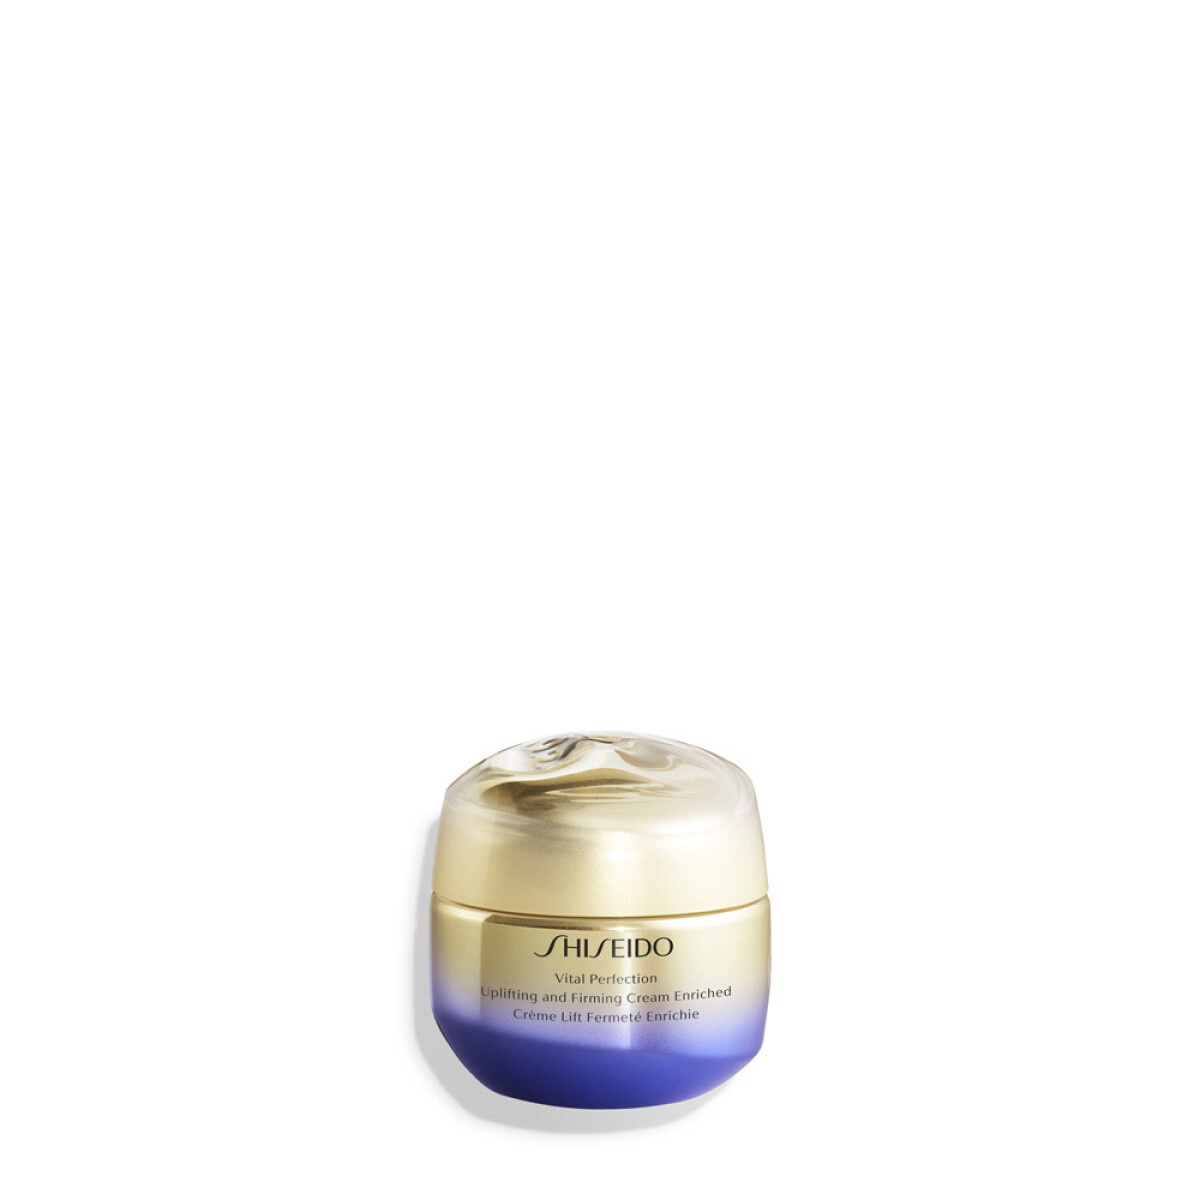 Vital perfection Uplifting Uplifting and Firming Cream Enriched 50ml 